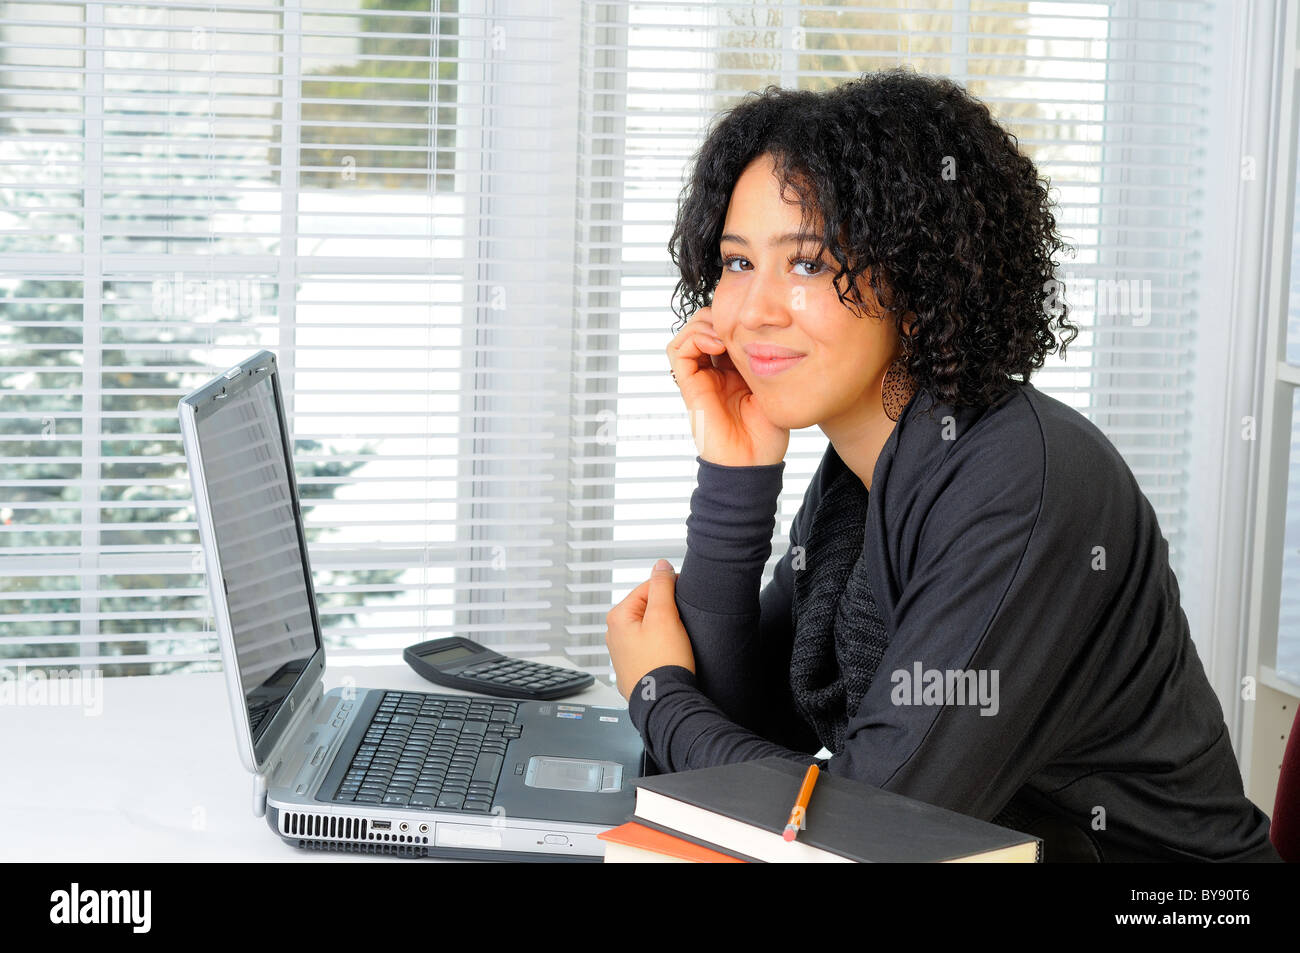 Young Woman Sat At Her Desk Using A Laptop Computer Stock Photo